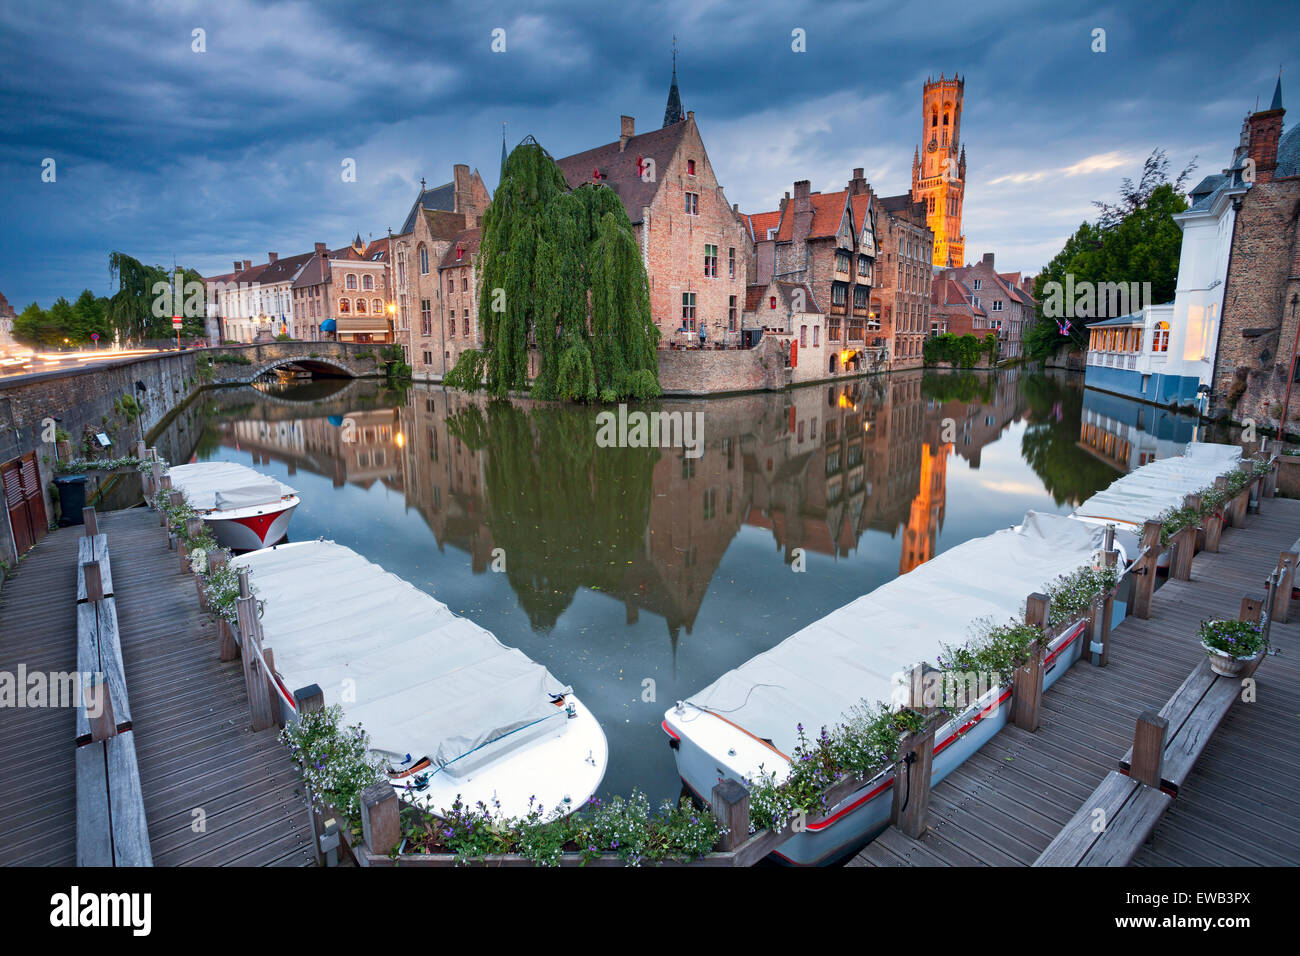 Bruges. Image of famous most photographed location in Bruges, Belgium during twilight blue hour. Stock Photo